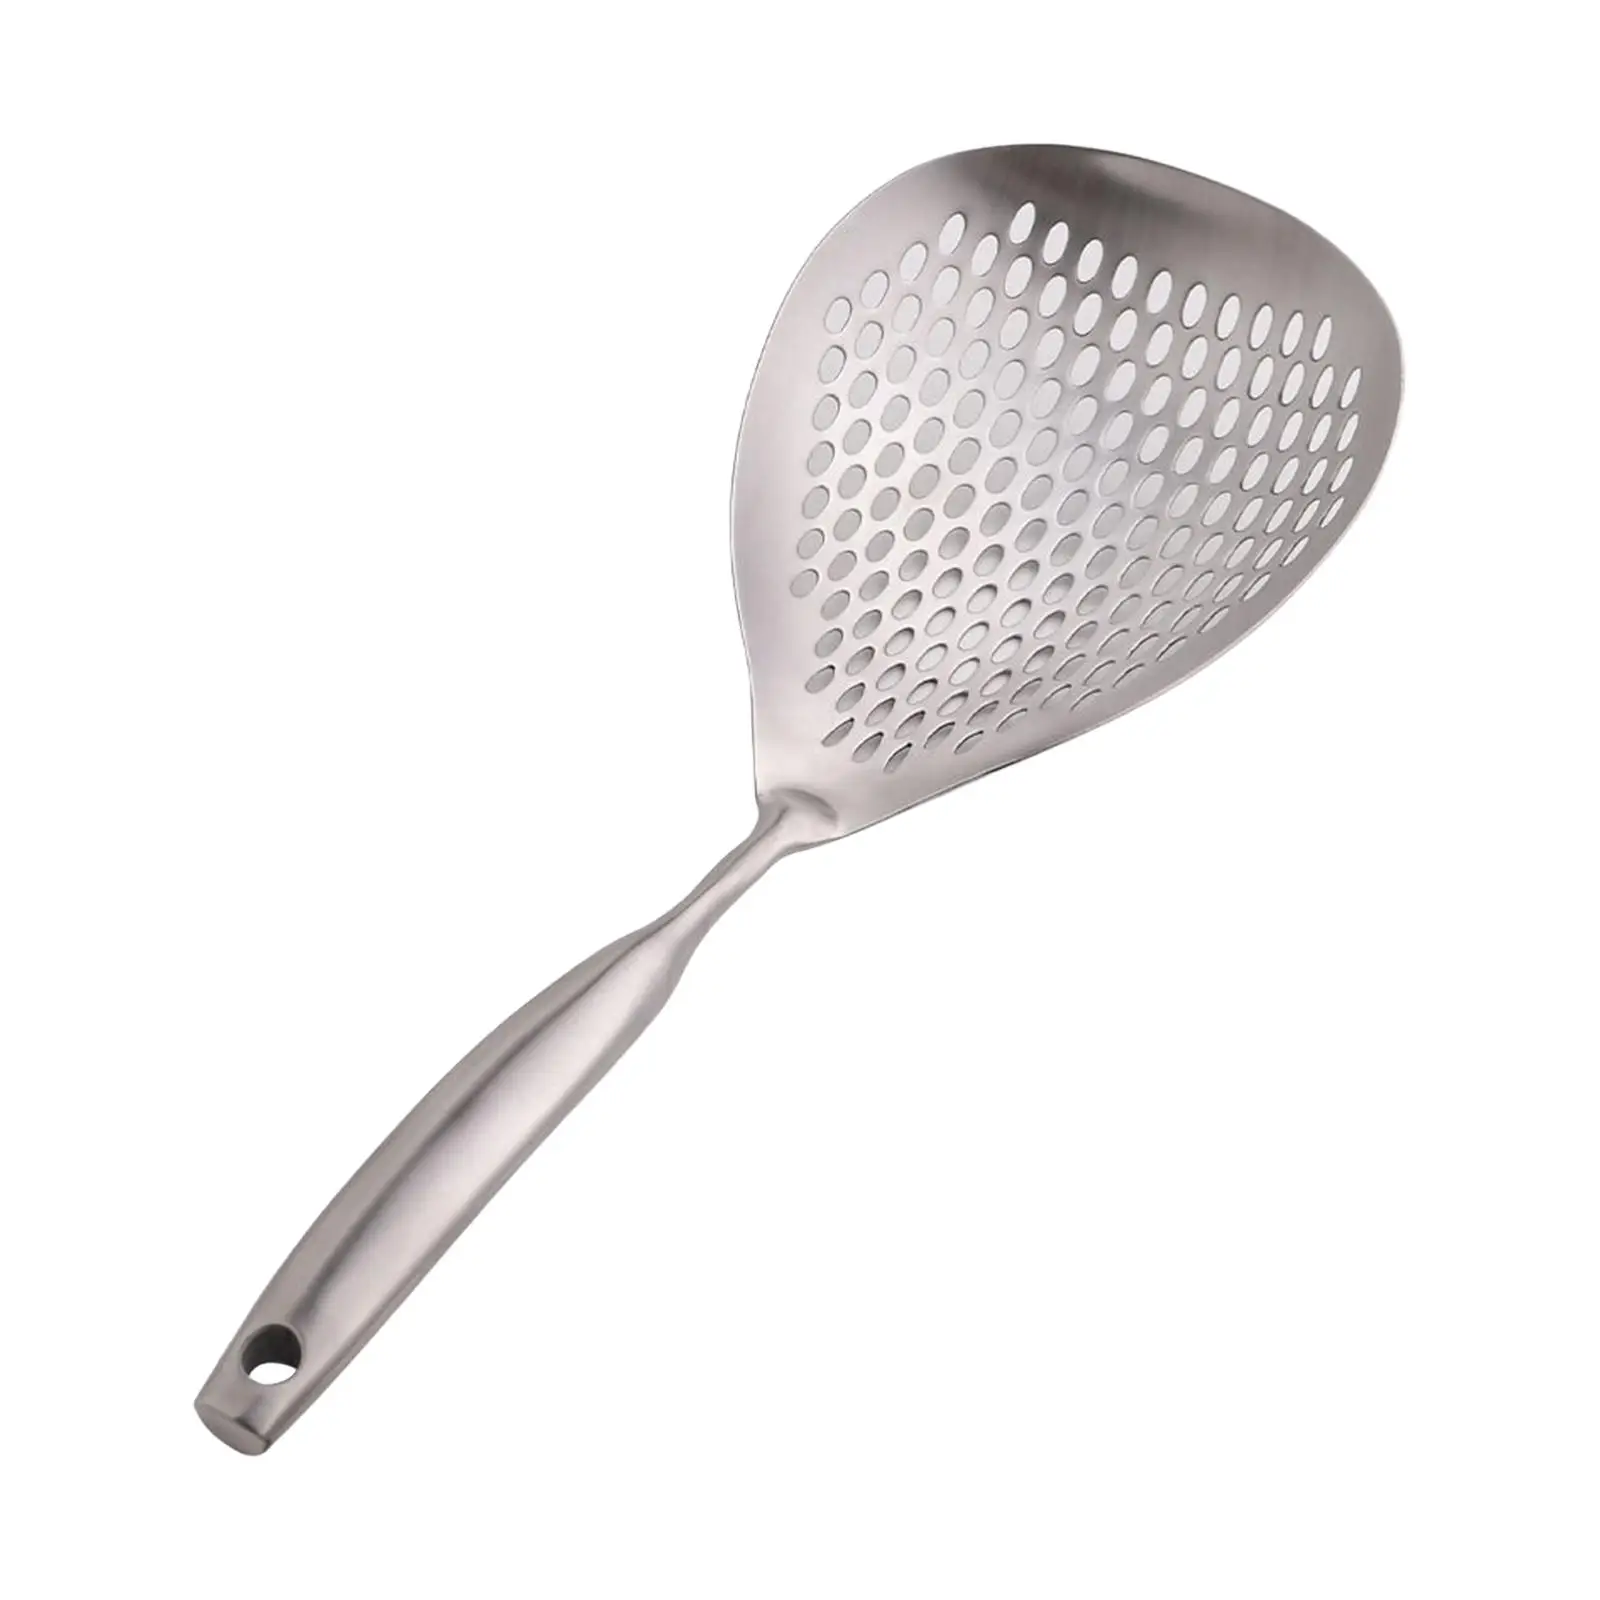 Frying Spoon Spider Strainer Stainless Steel Kitchen Strainer Ladle Pasta Strainer Spoon for Vegetables Potato Chips Noodles